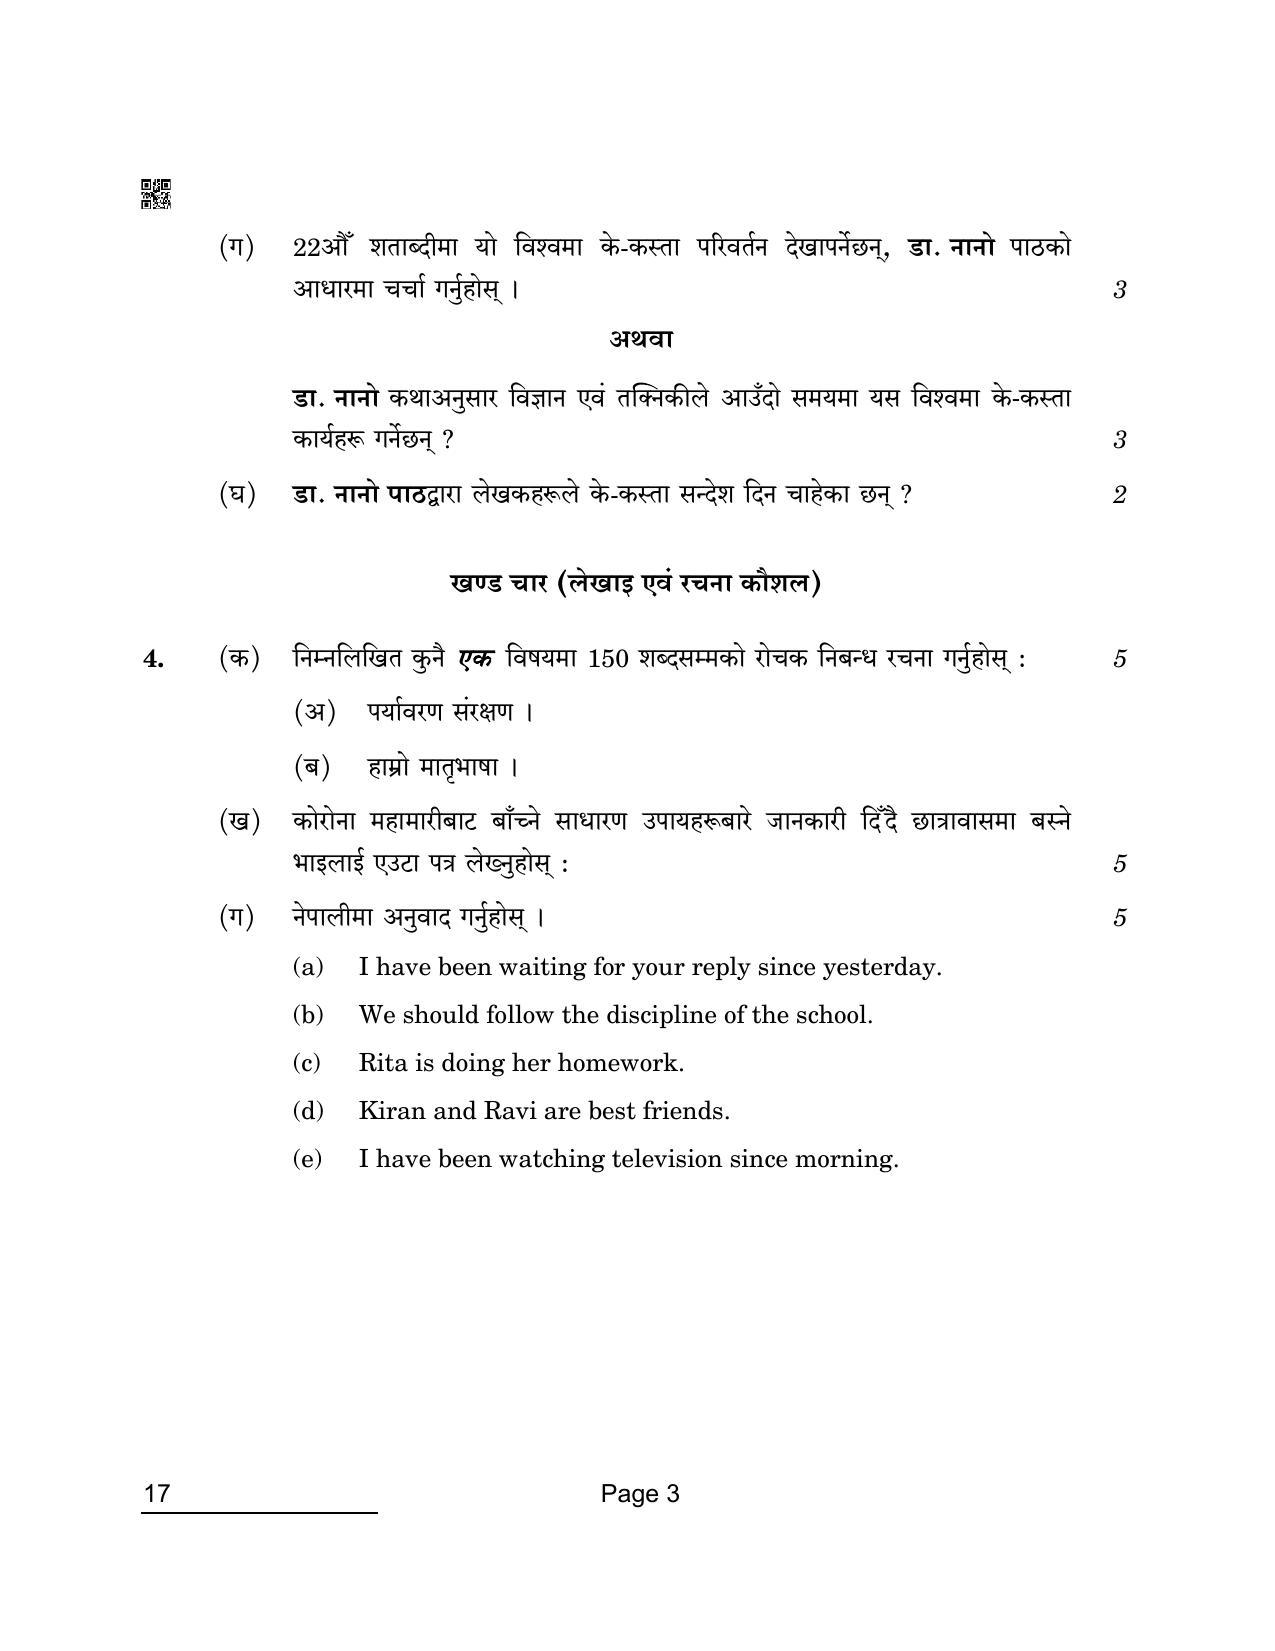 CBSE Class 10 17 Nepali 2022 Compartment Question Paper - Page 3